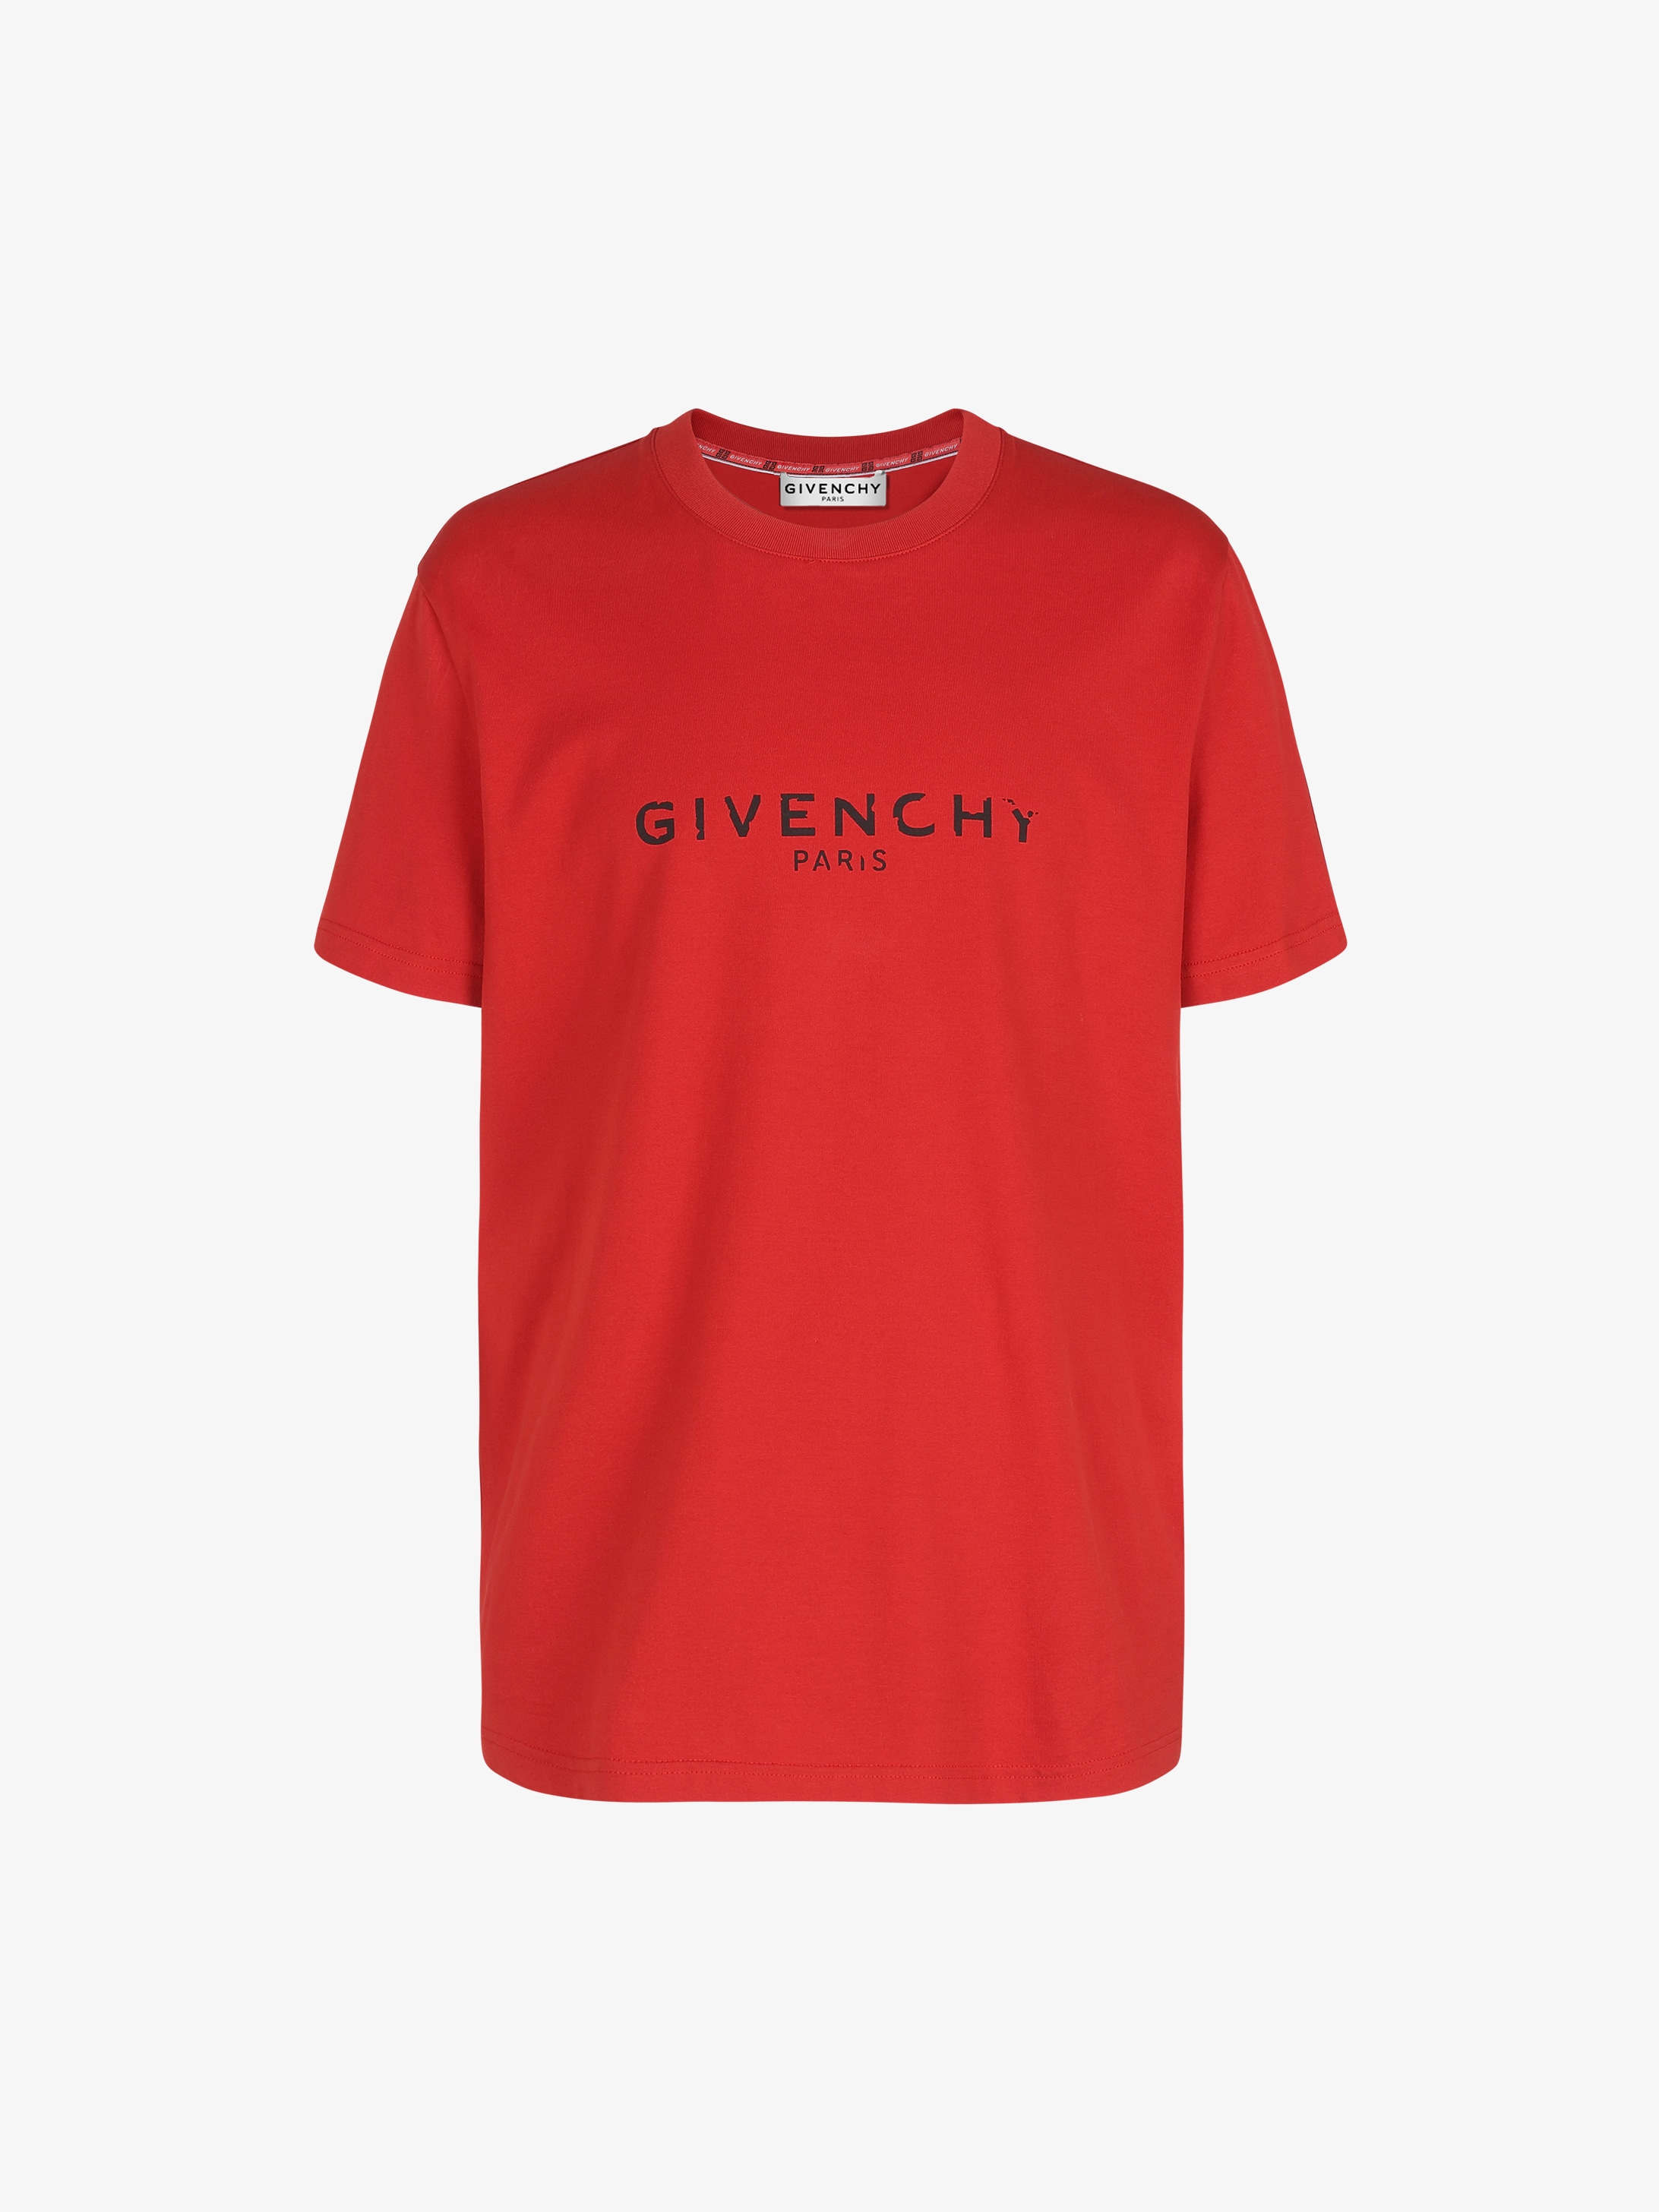 givenchy paris red